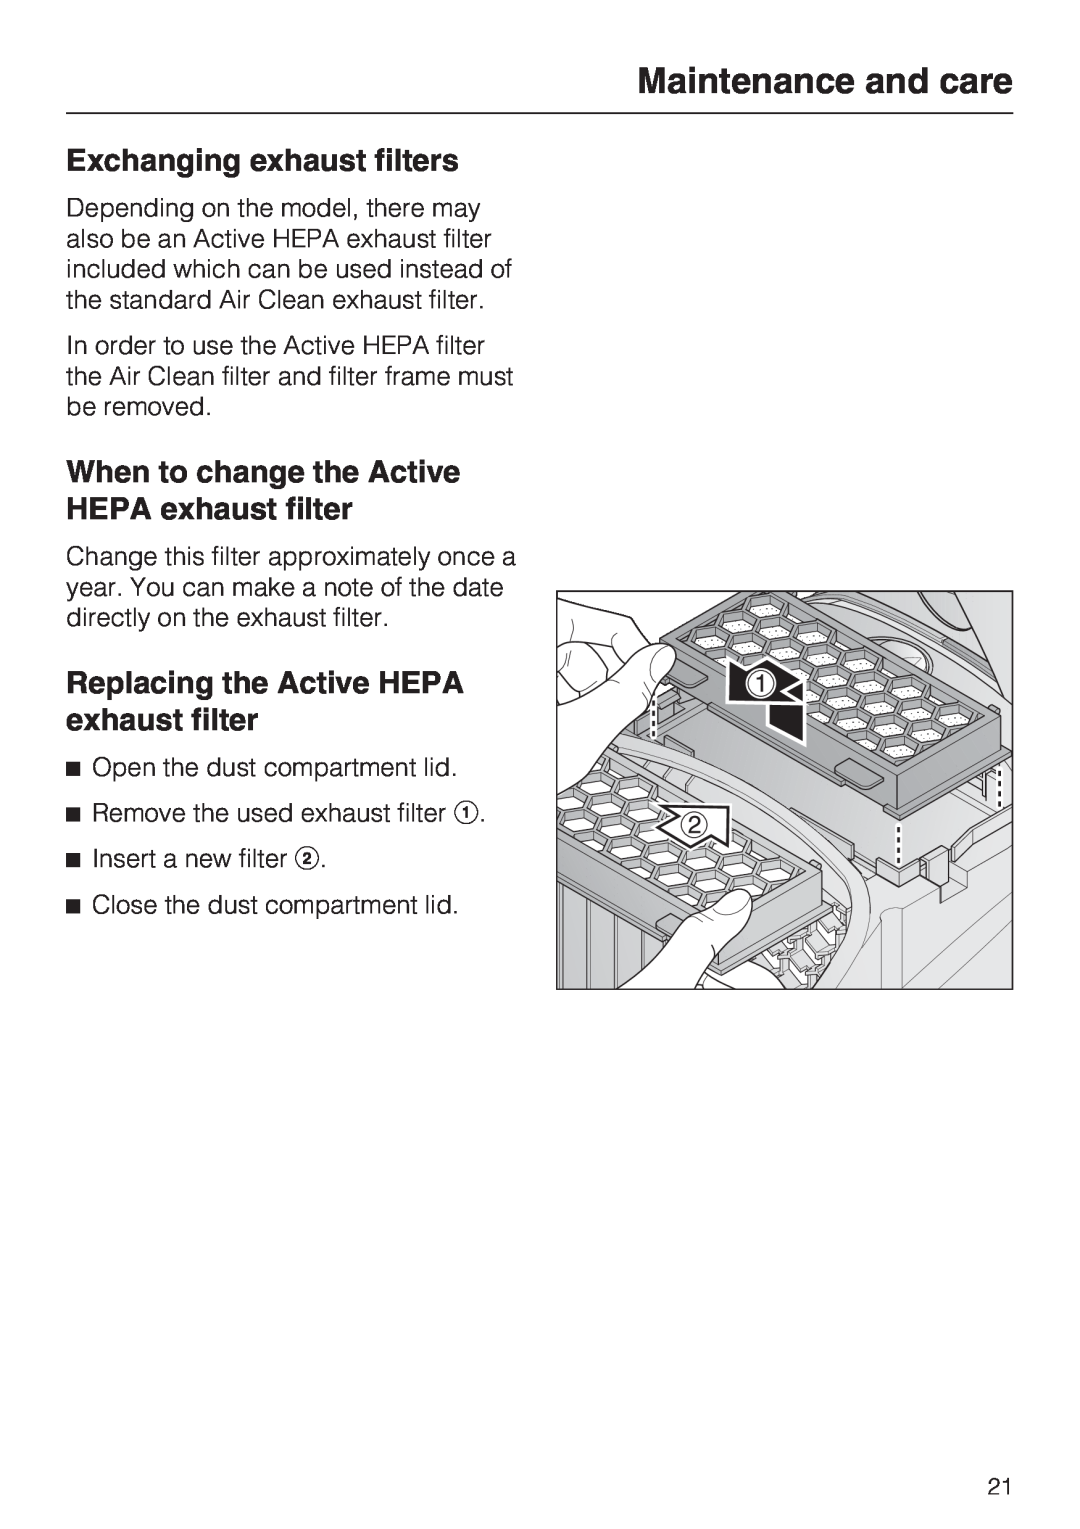 Miele S 2000, HS12, S 2120 Exchanging exhaust filters, When to change the Active HEPA exhaust filter, Maintenance and care 